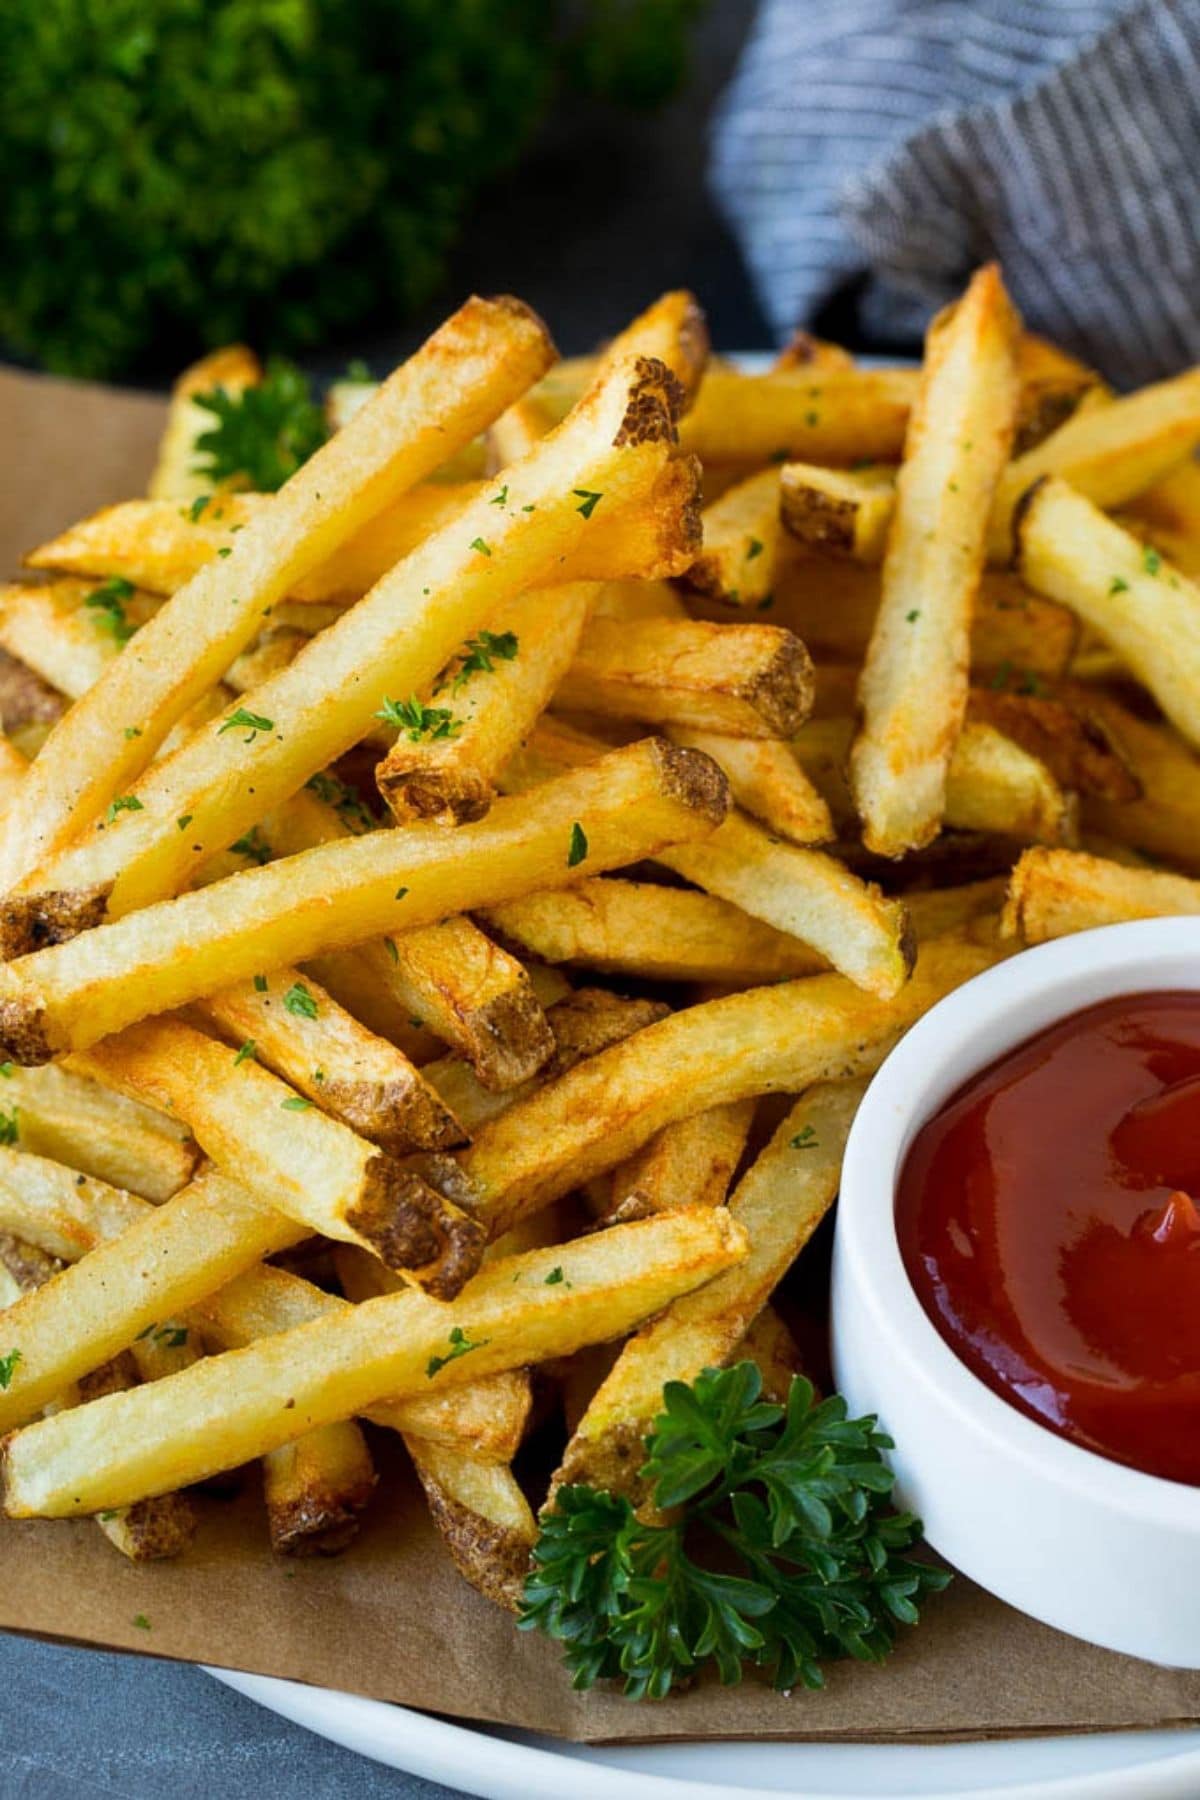 French fries on tray